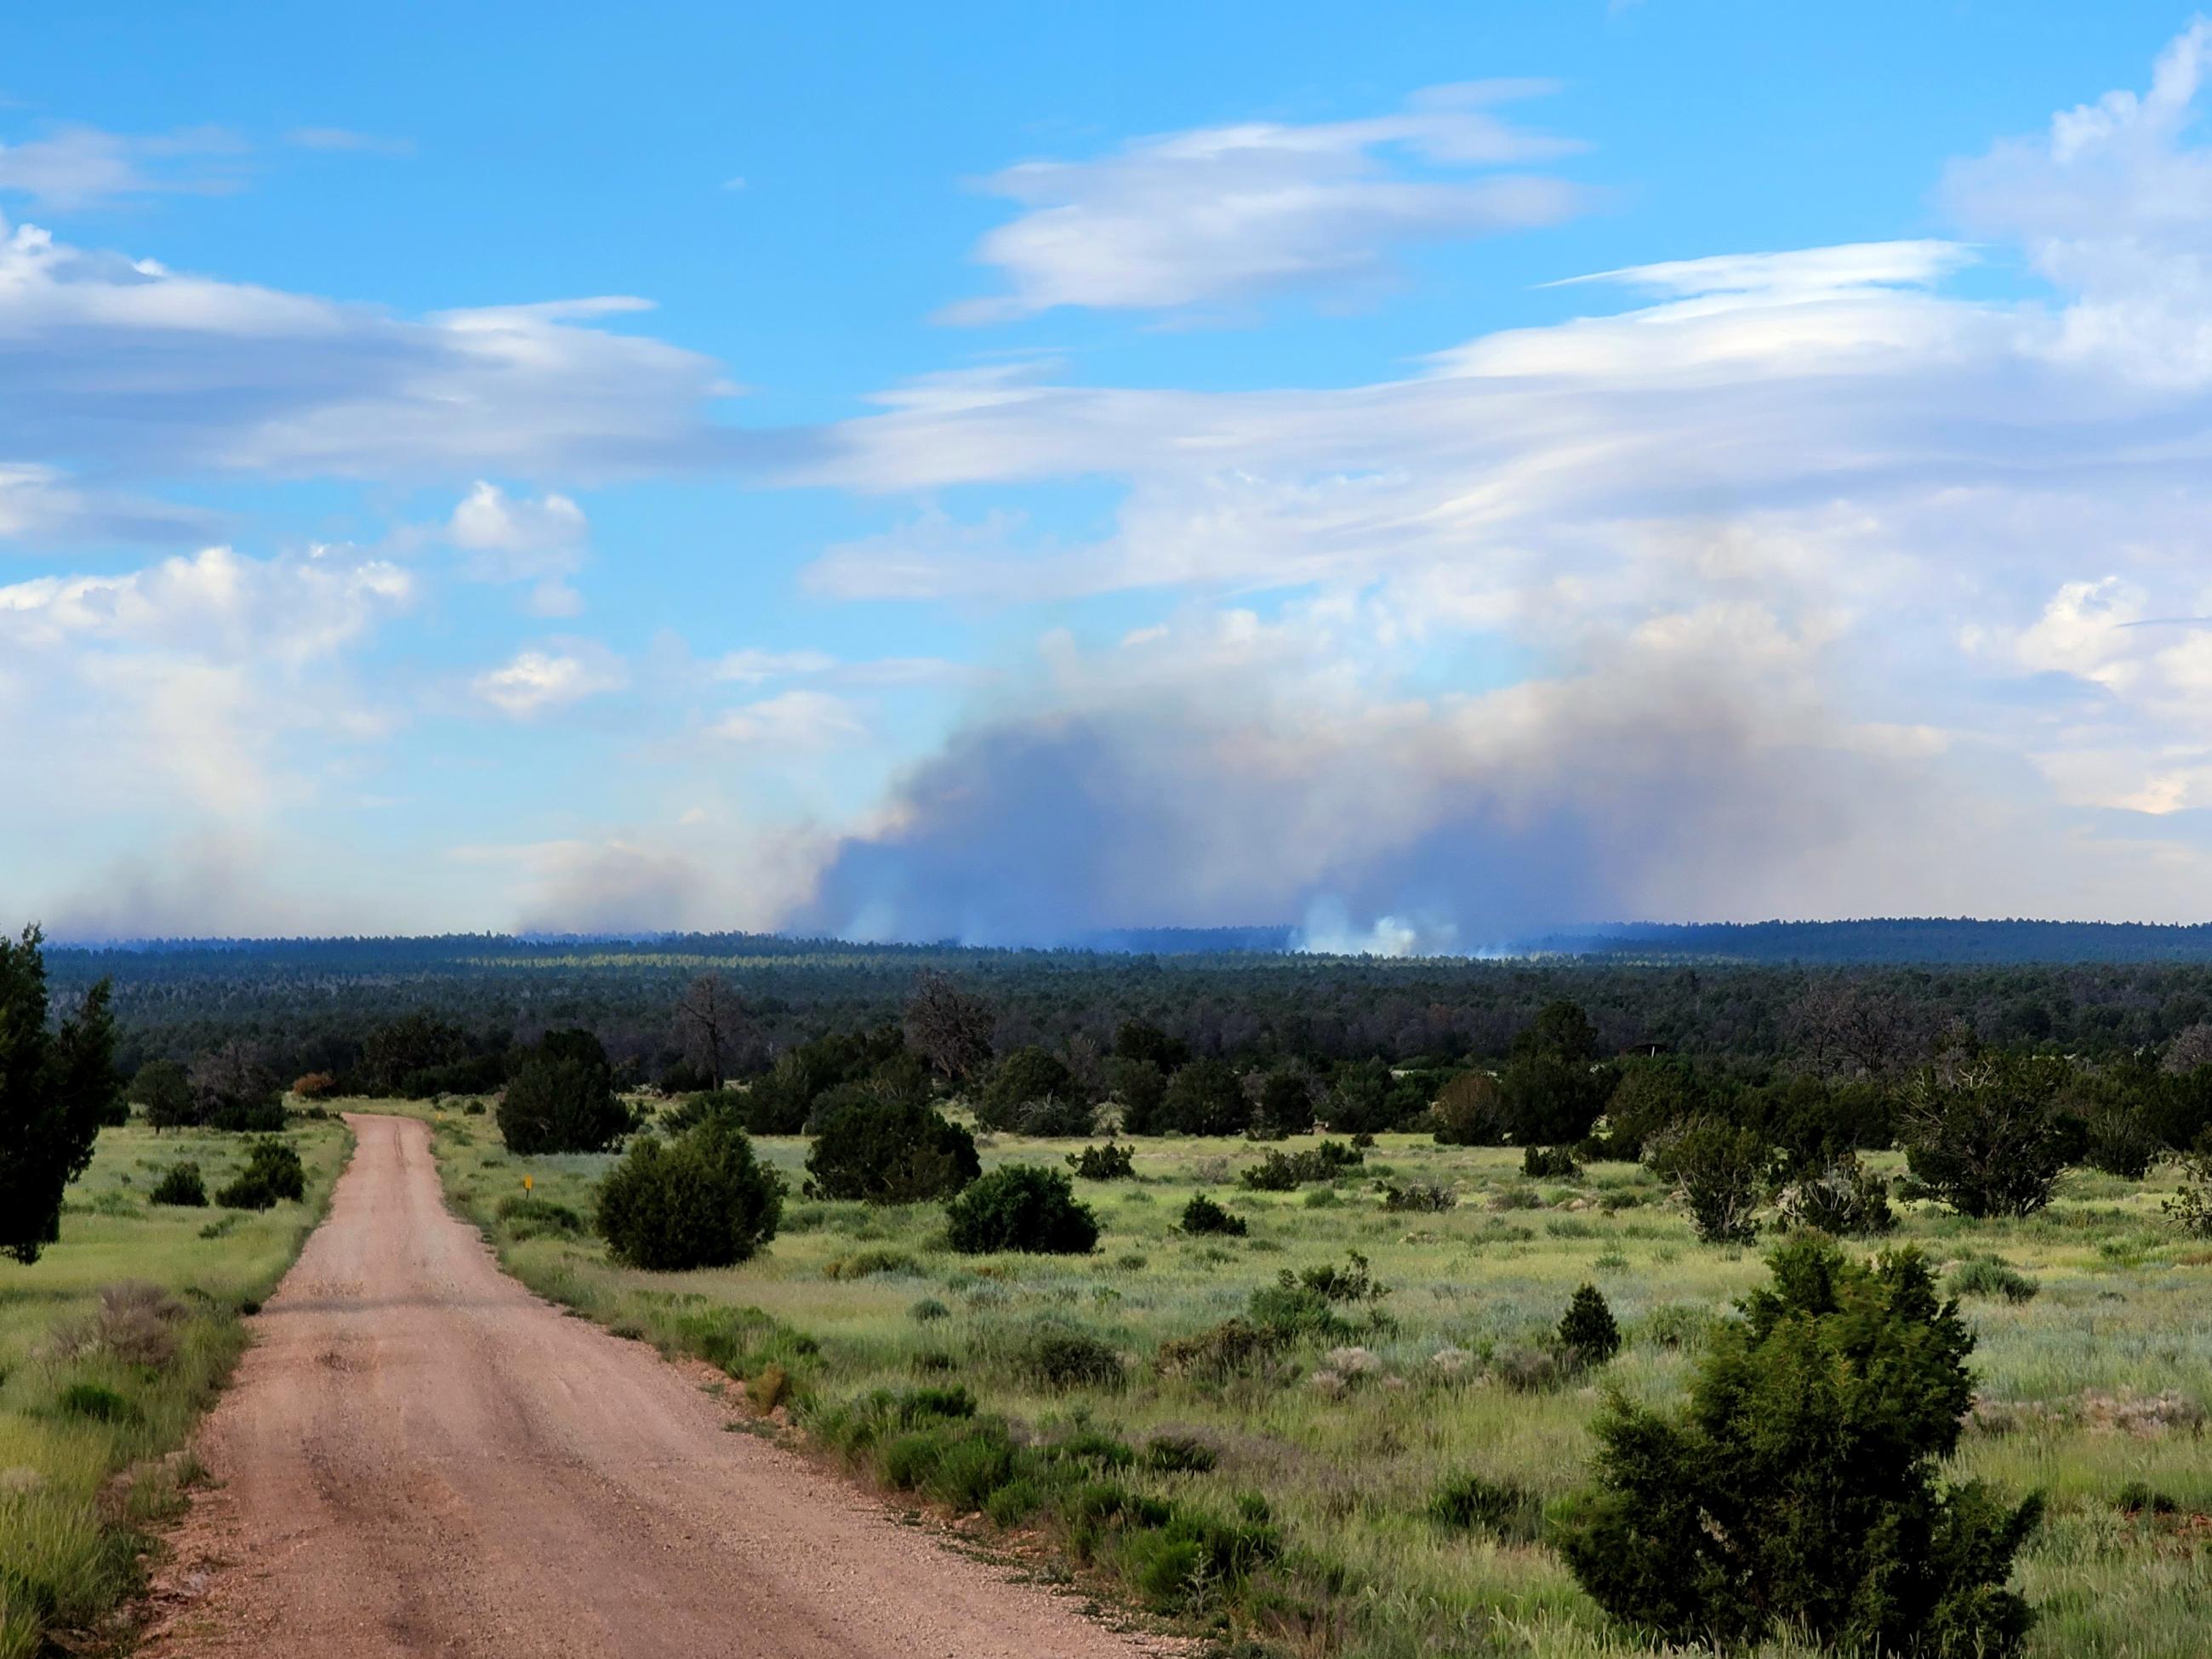 Smoke is rising in the distance beyond a grassy meadow at the forest's edge, a dirt road heads off into the distance starting at the viewers point, all beneath a partly cloudy sky.